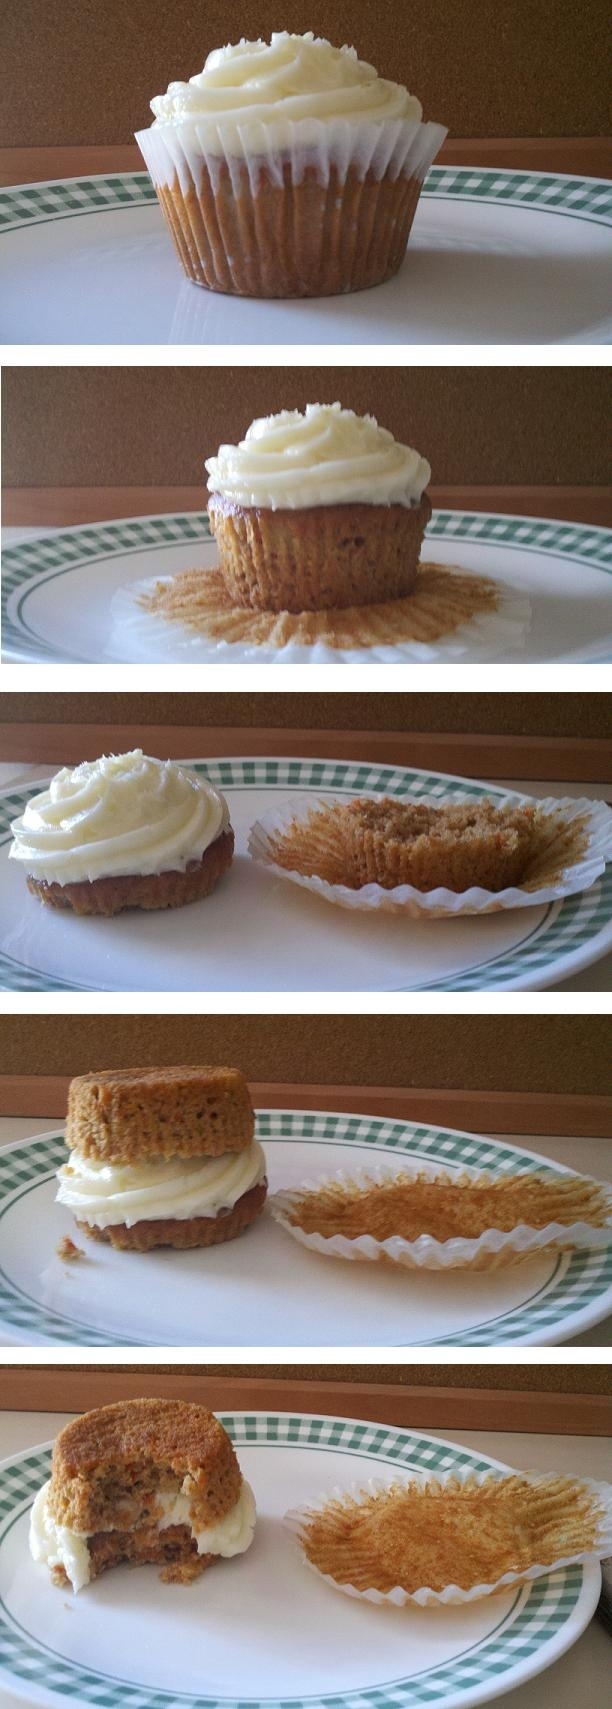 Because now you know how to properly eat a cupcake: